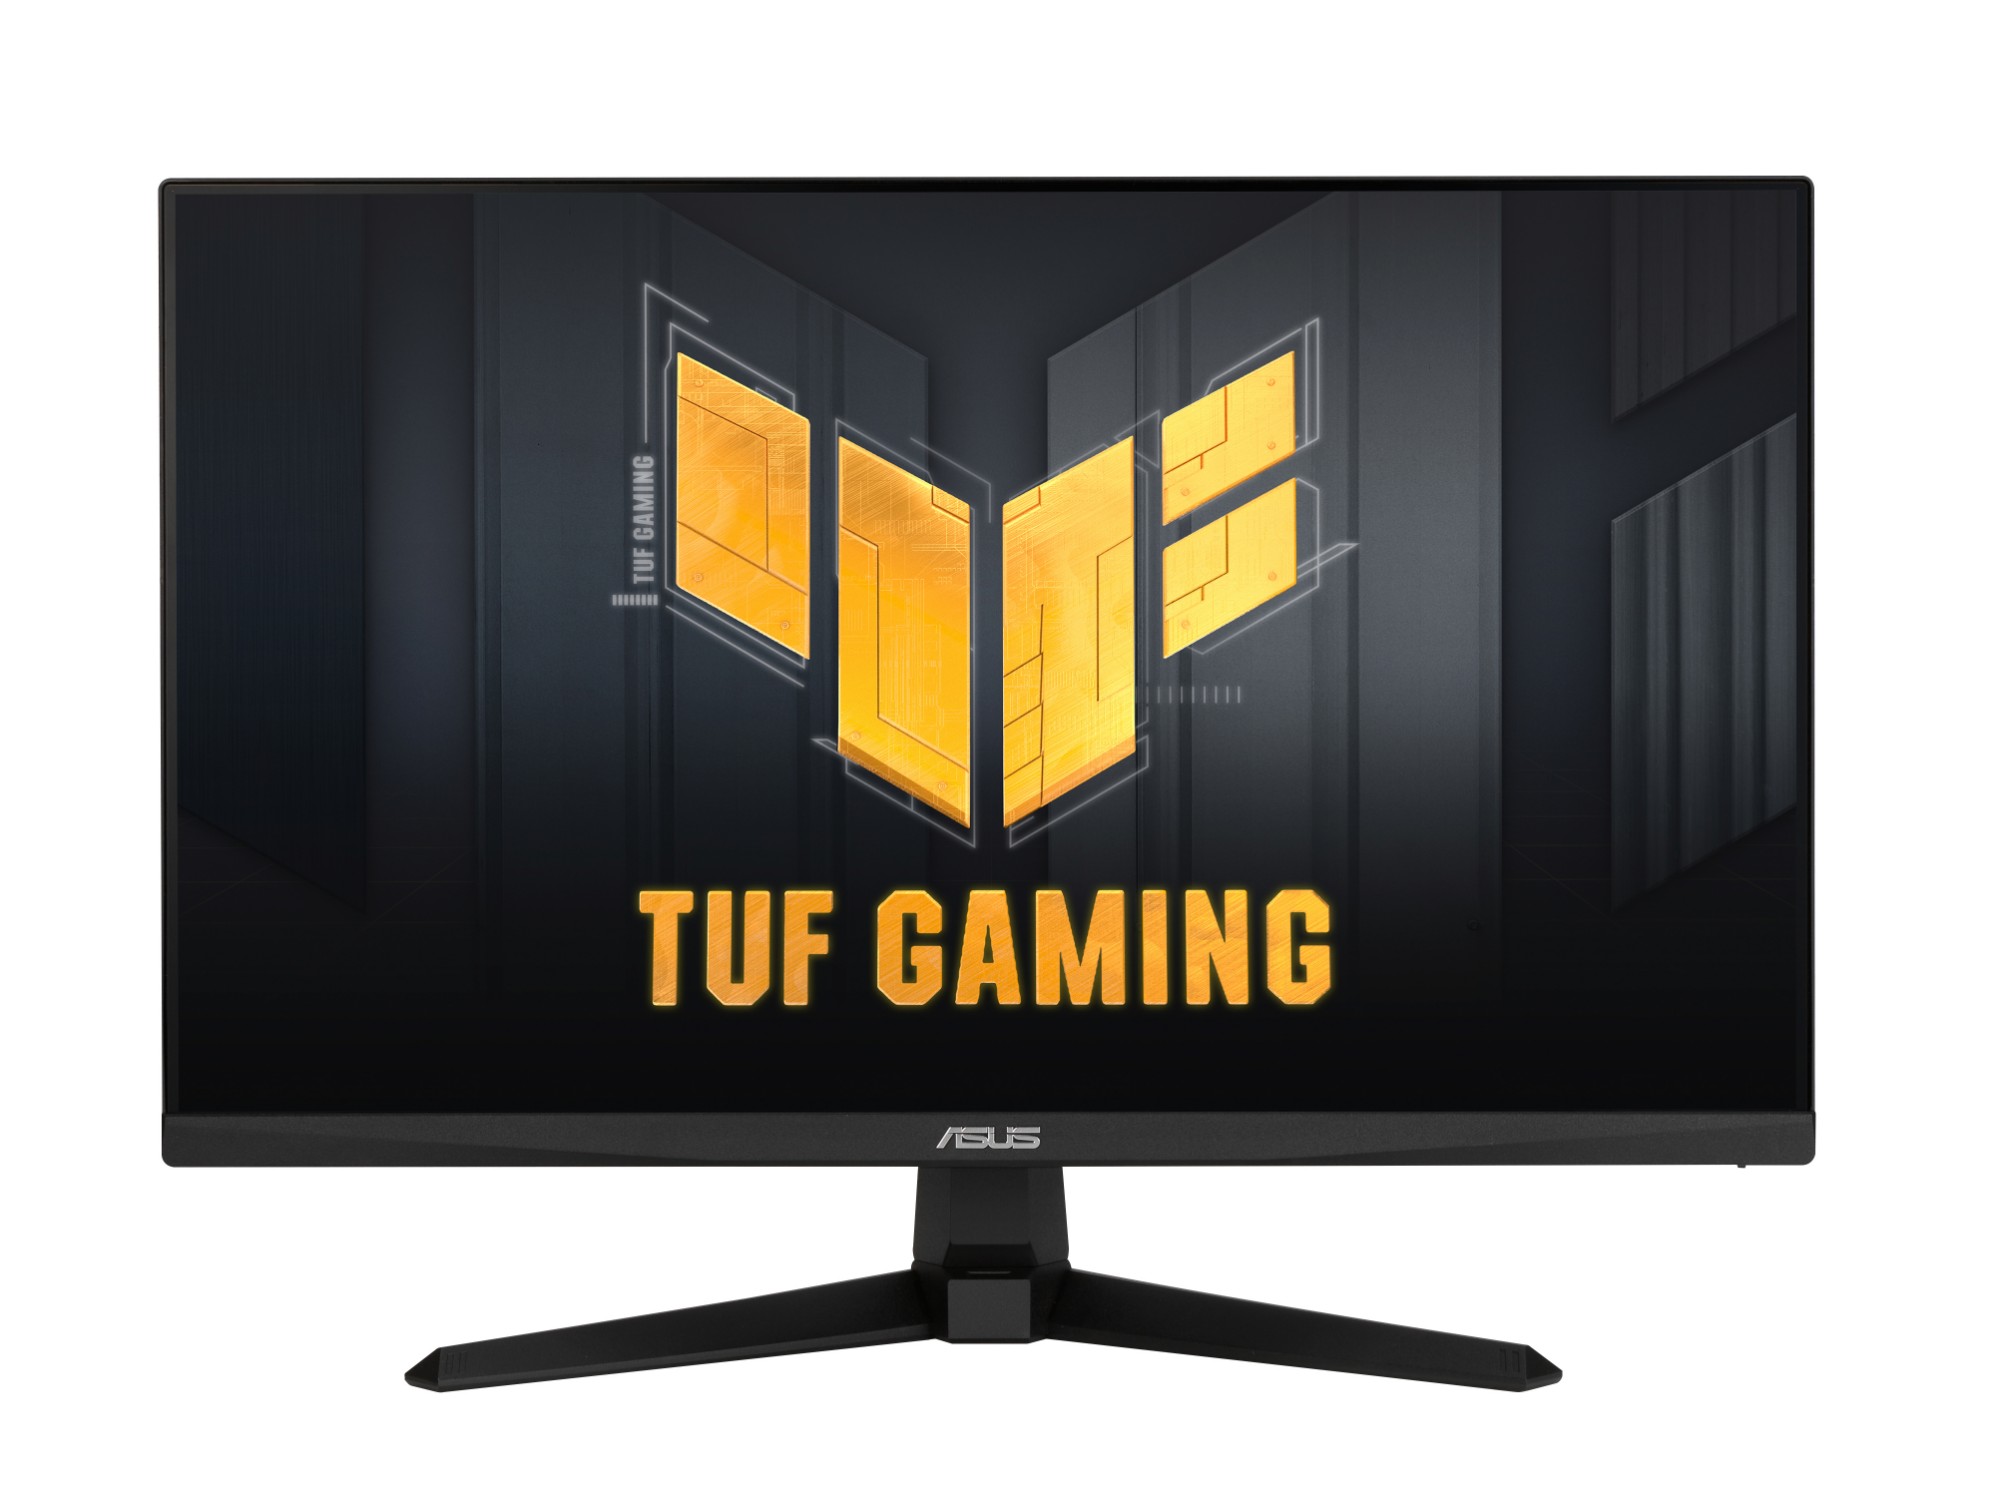 TUF Gaming VG249QM1A Gaming Monitor ? 23.8 inch FHD (1920x1080), Fast IPS, overclocking 270 Hz (Above 144Hz, 240Hz), Extreme Low Motion Blur, 1ms (GTG), 99% sRGB, FreeSync Premium, G-Sync compatible